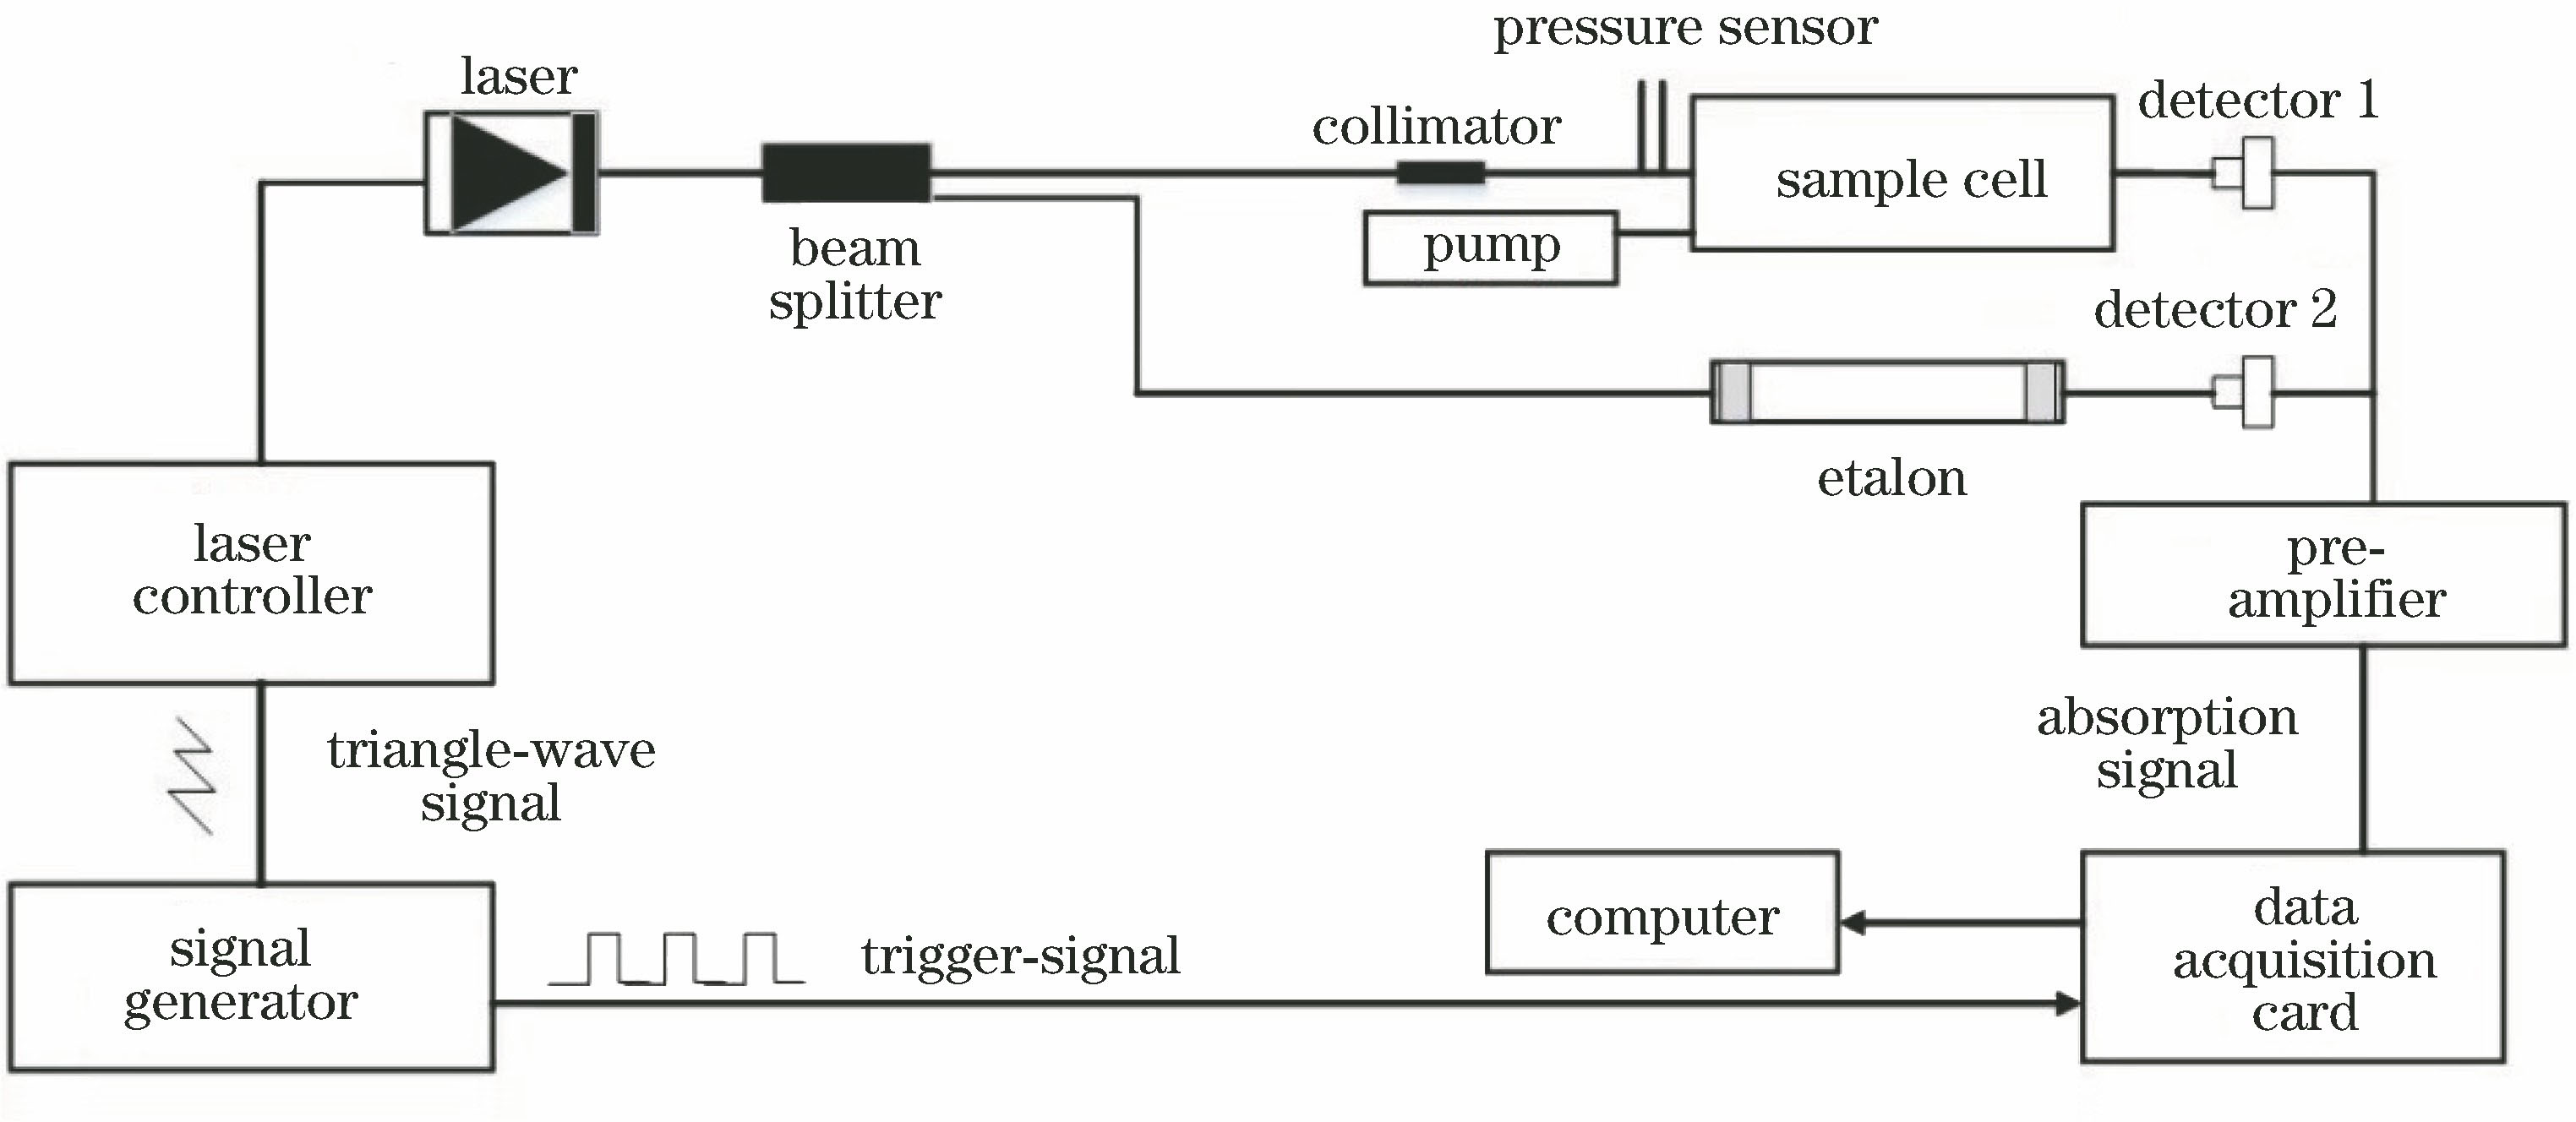 Schematic of experiment for laser absorption spectroscopy